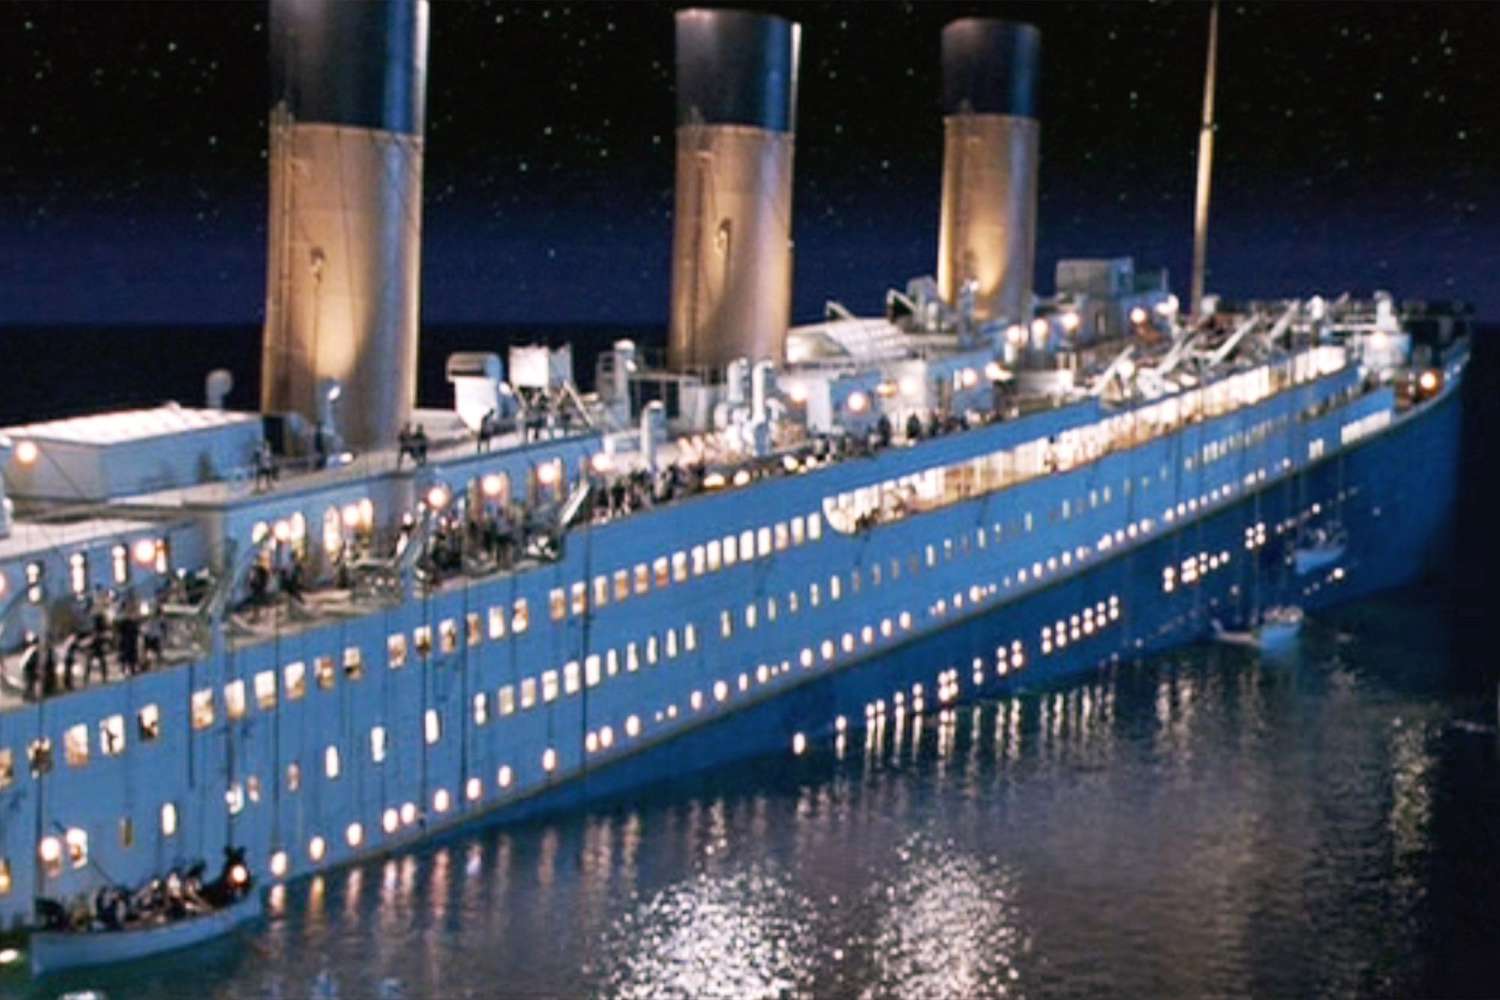 James Cameron says he got the Titanic's sinking half right in movie 